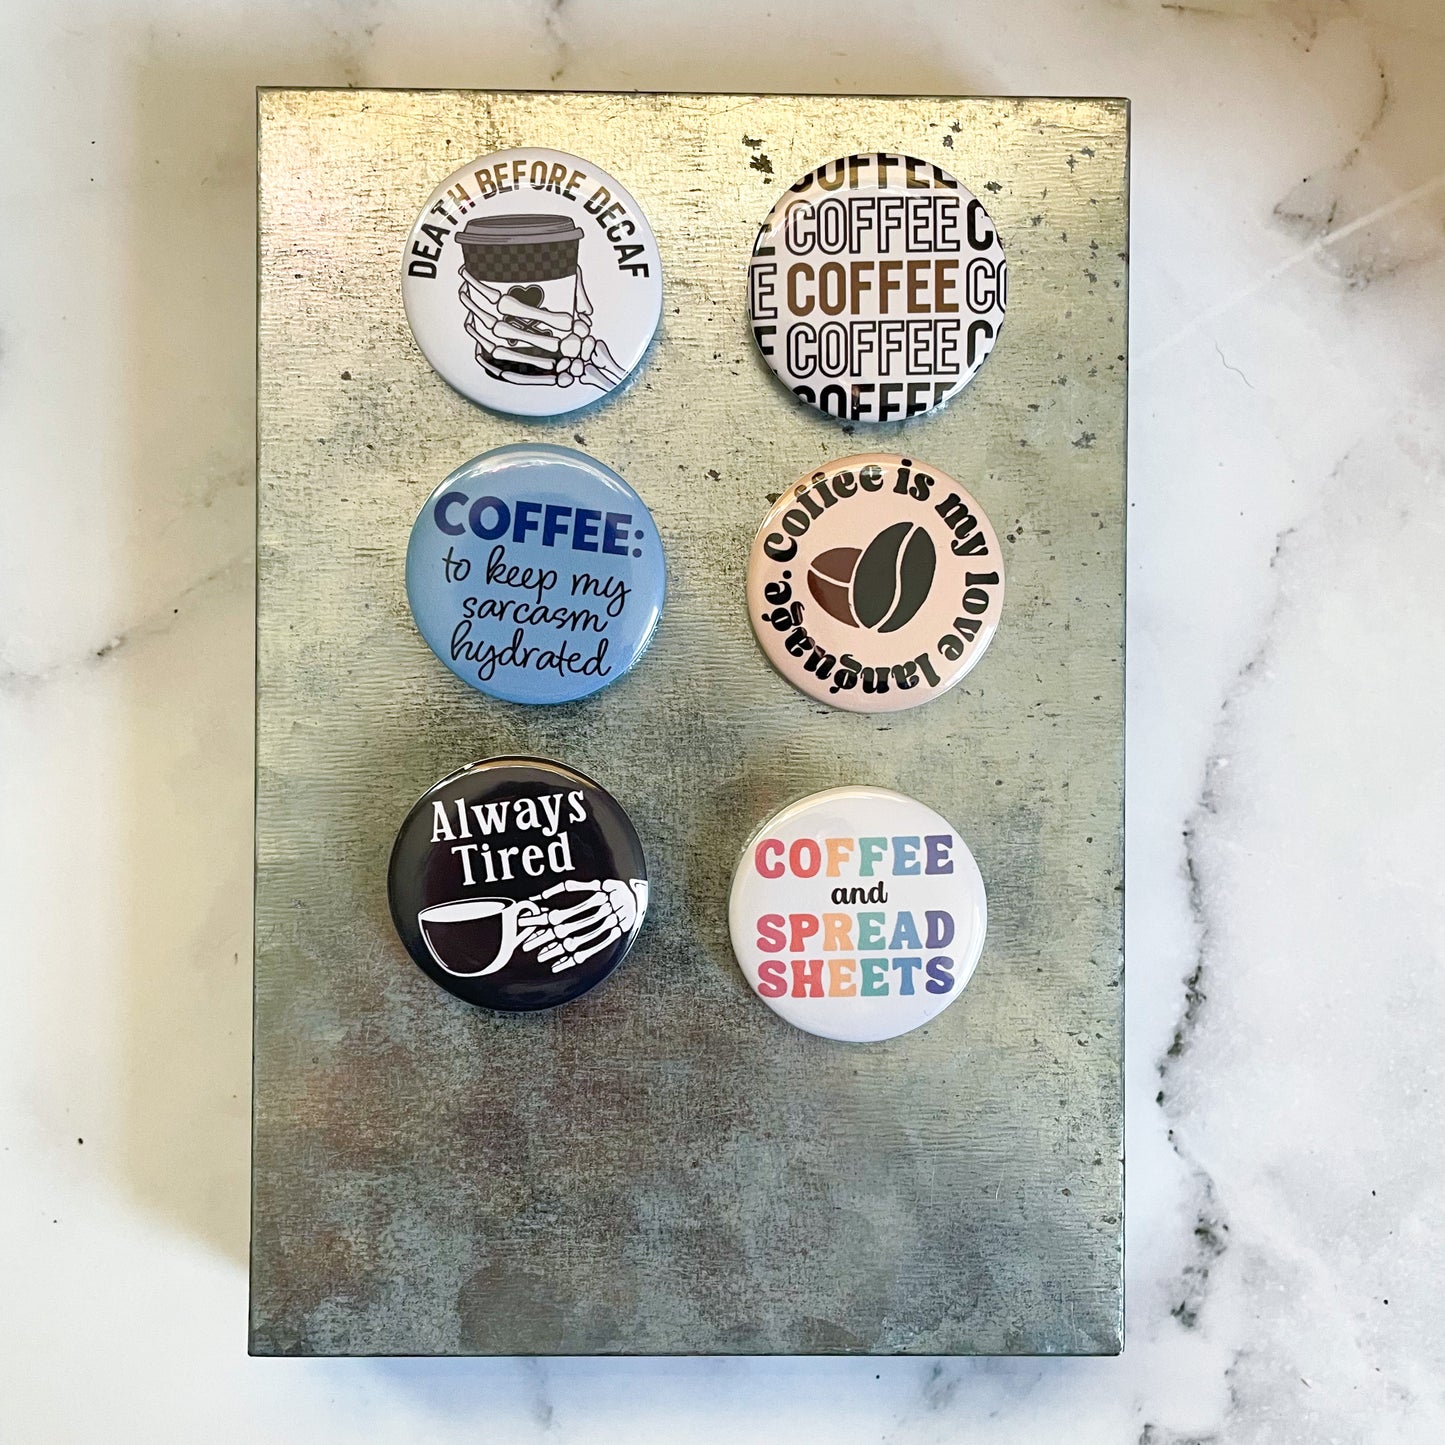 Coffee and Spreadsheets Excel Button / Badge (Buy 4 Get 1 FREE)